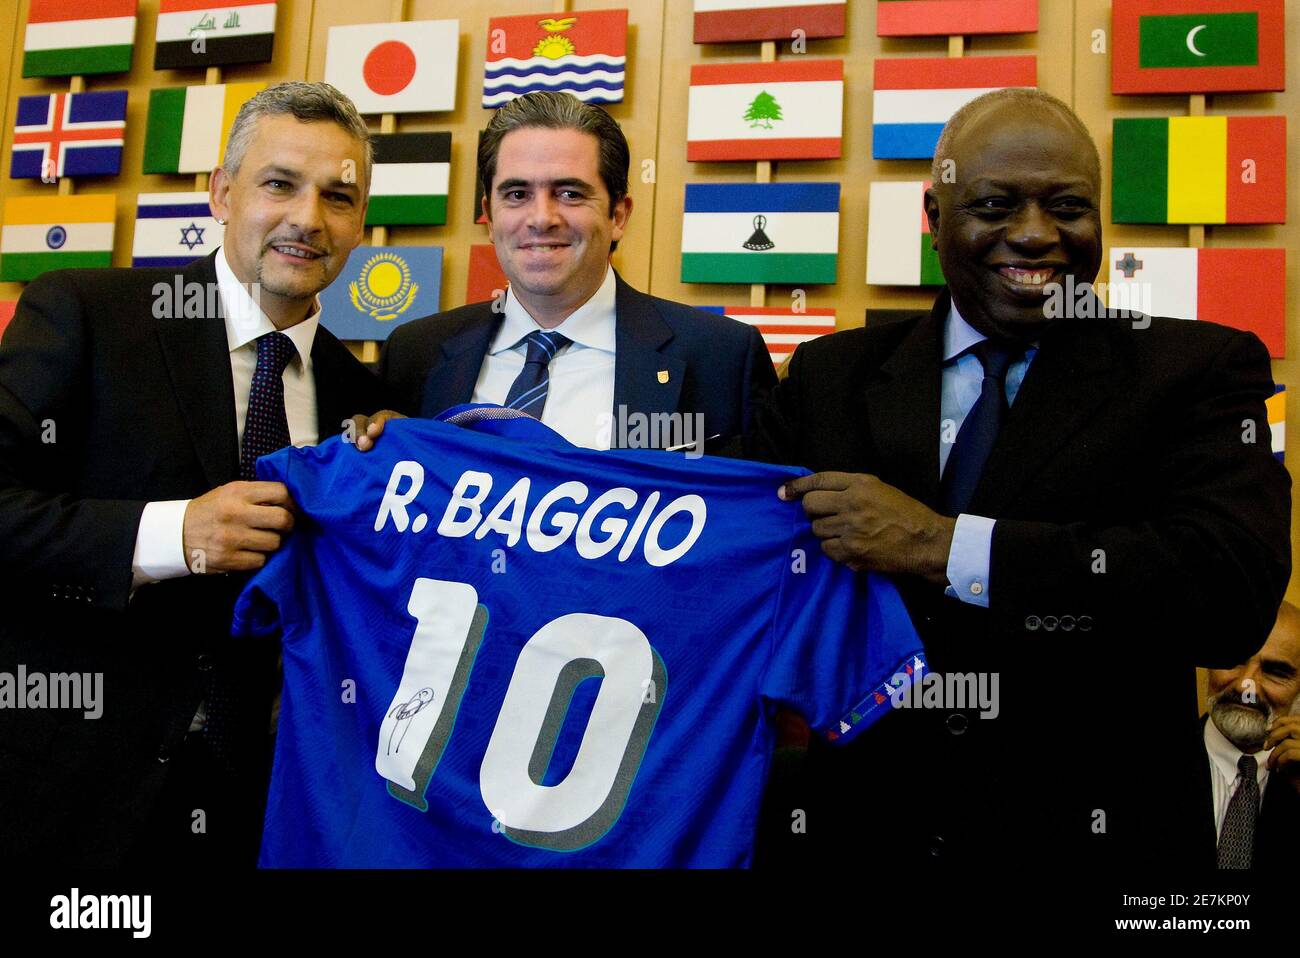 Former Italy striker Roberto Baggio (L) gifts to Jacques Diouf (R),  Director-General of Food and Agriculture Organization of the United Nations  (FAO), his Italy's soccer jersey as E.Macedo de Medeiros, Chief Executive